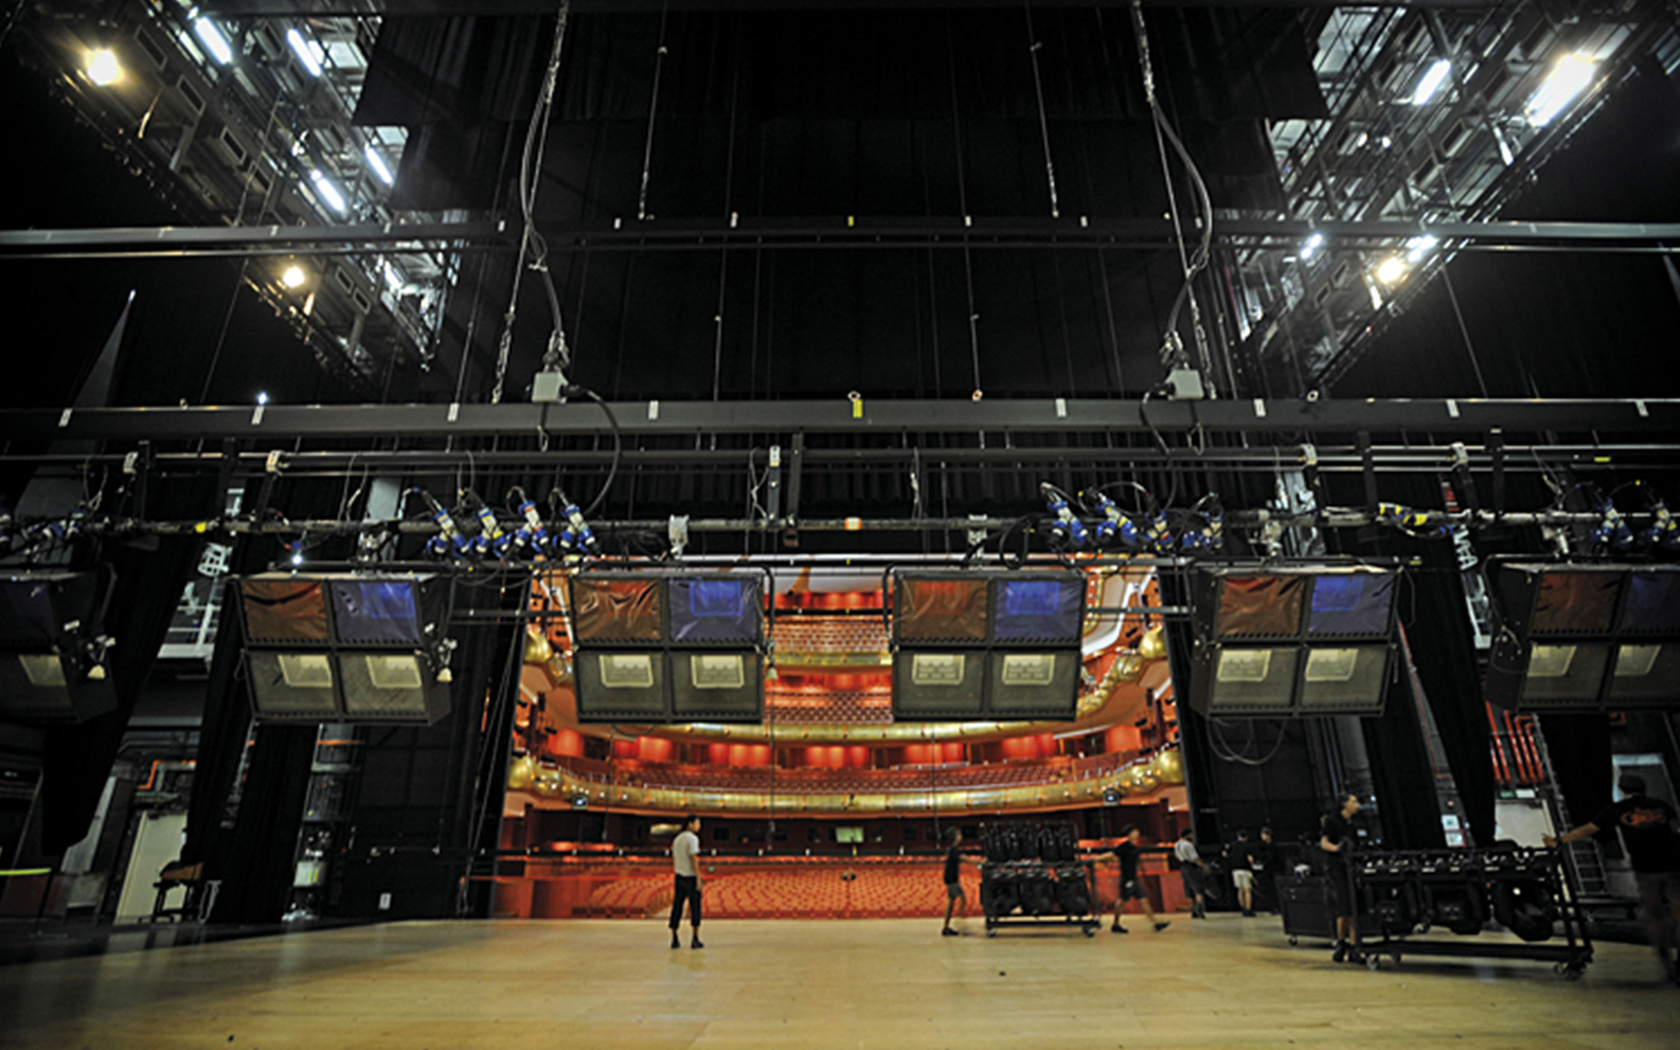 An image of people moving stage equipments on Esplanade Theatre stage